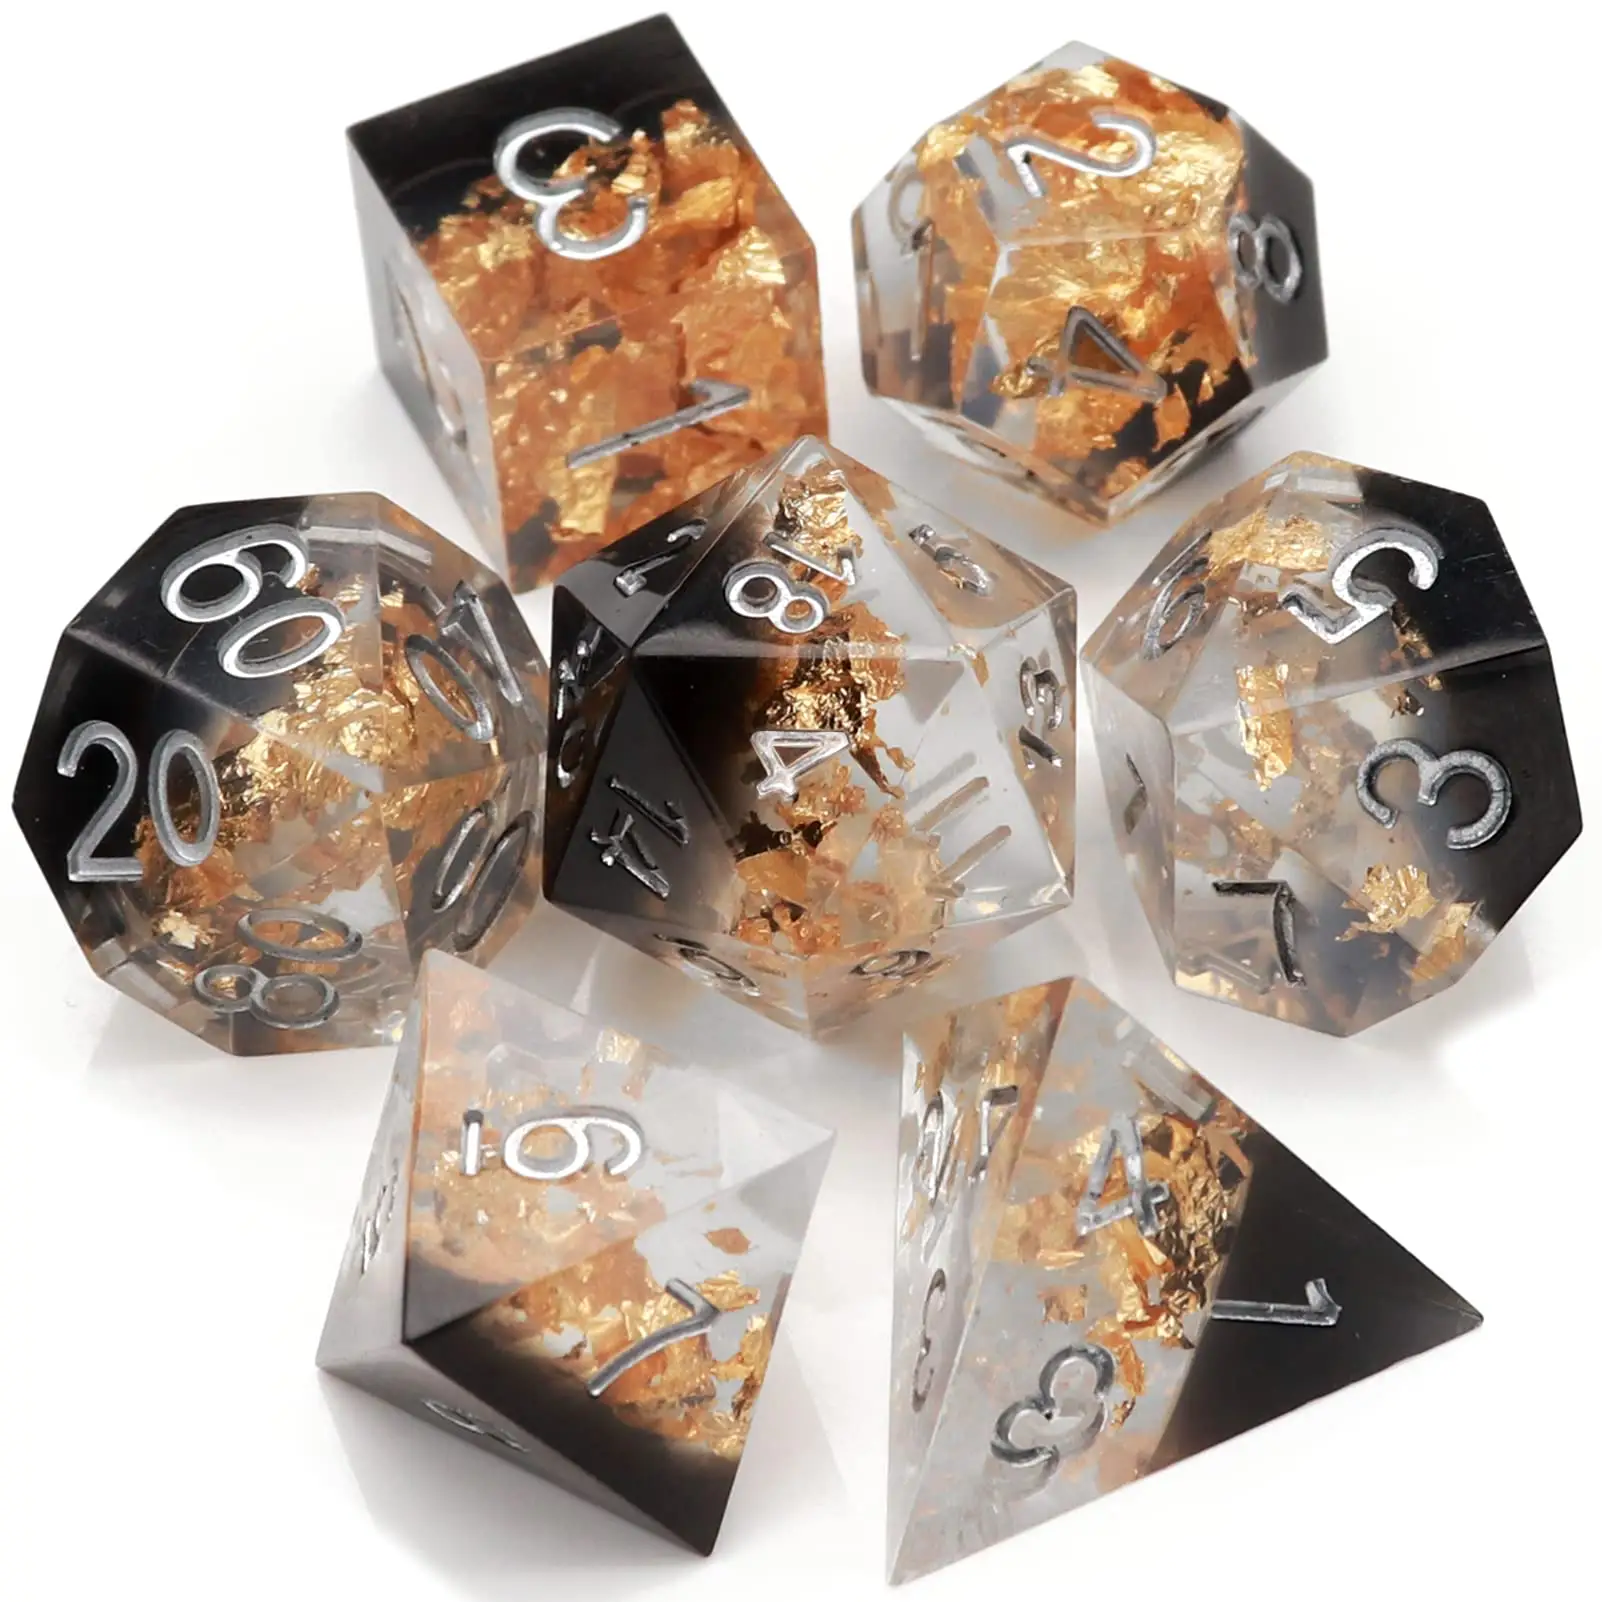 Crystal polyhedral resin colored dice set Custom Lord of the Rings DND game dice Right Angle resin solid edge dice